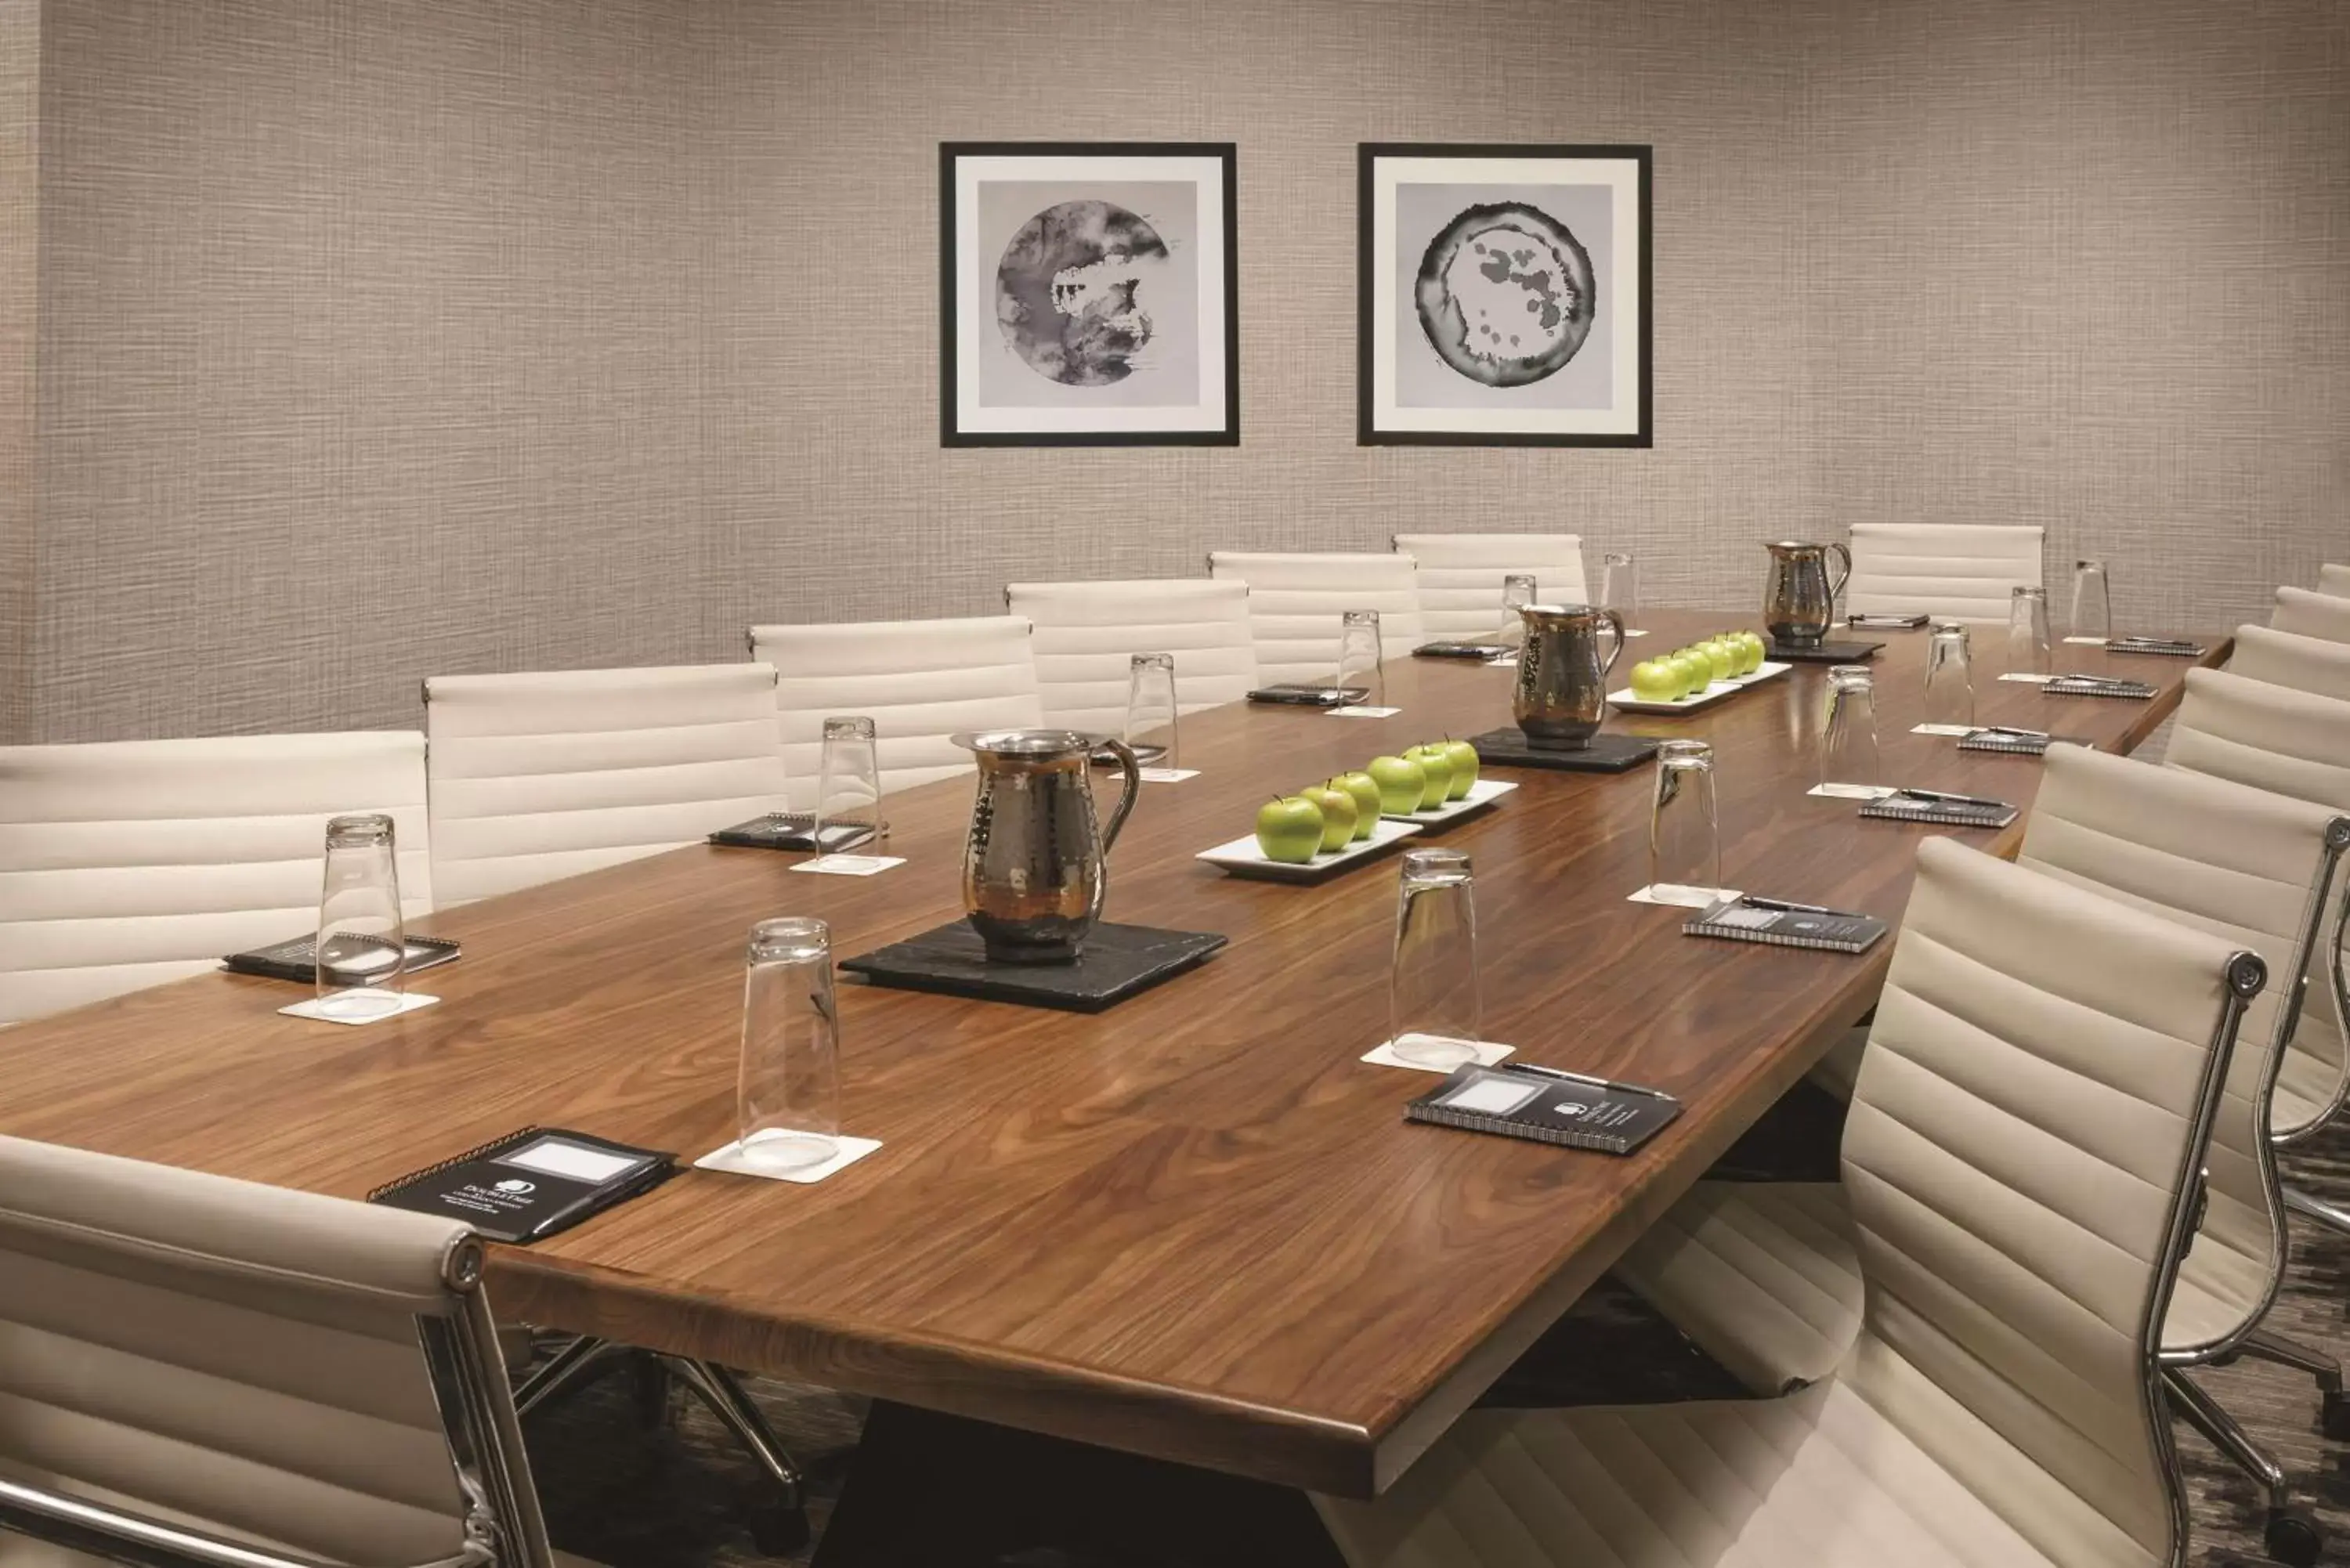 Meeting/conference room in DoubleTree by Hilton Colorado Springs